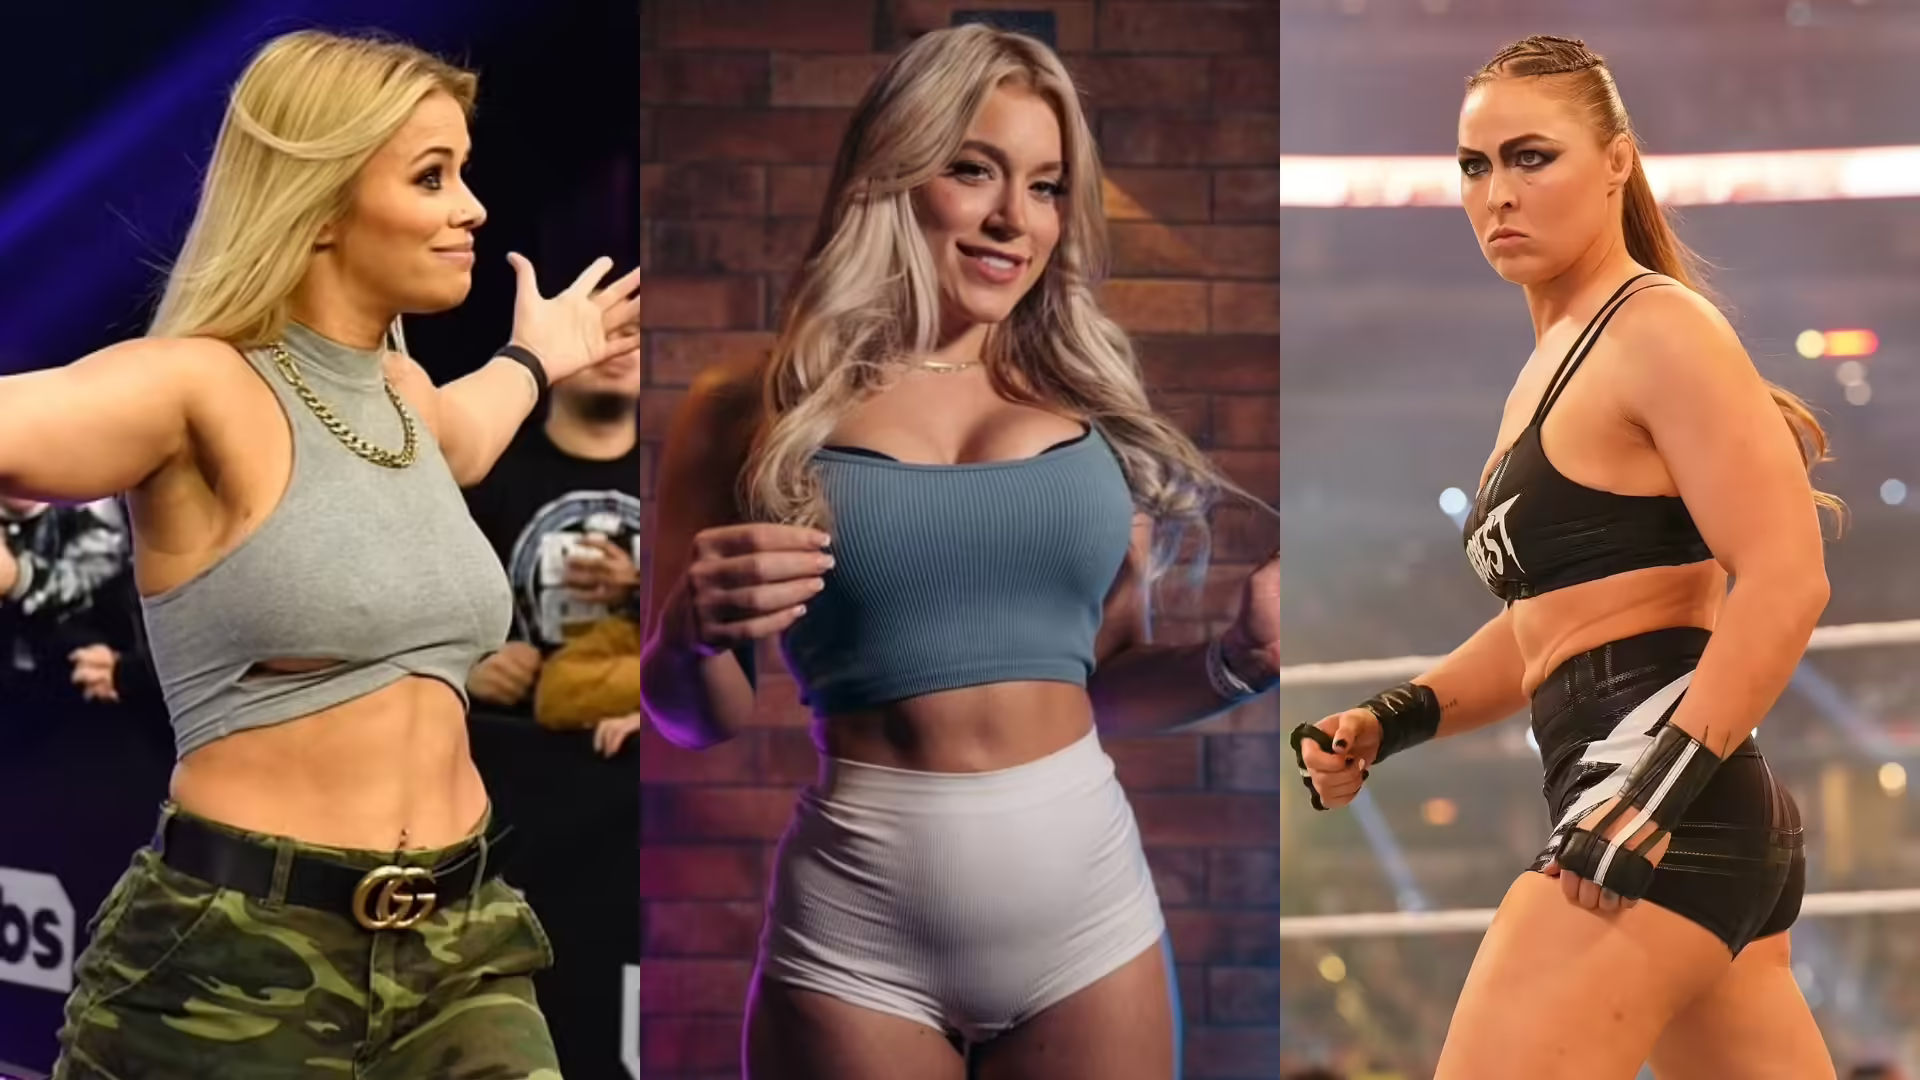 Elle Brooke wants to fight Ronda Rousey and Paige VanZant 